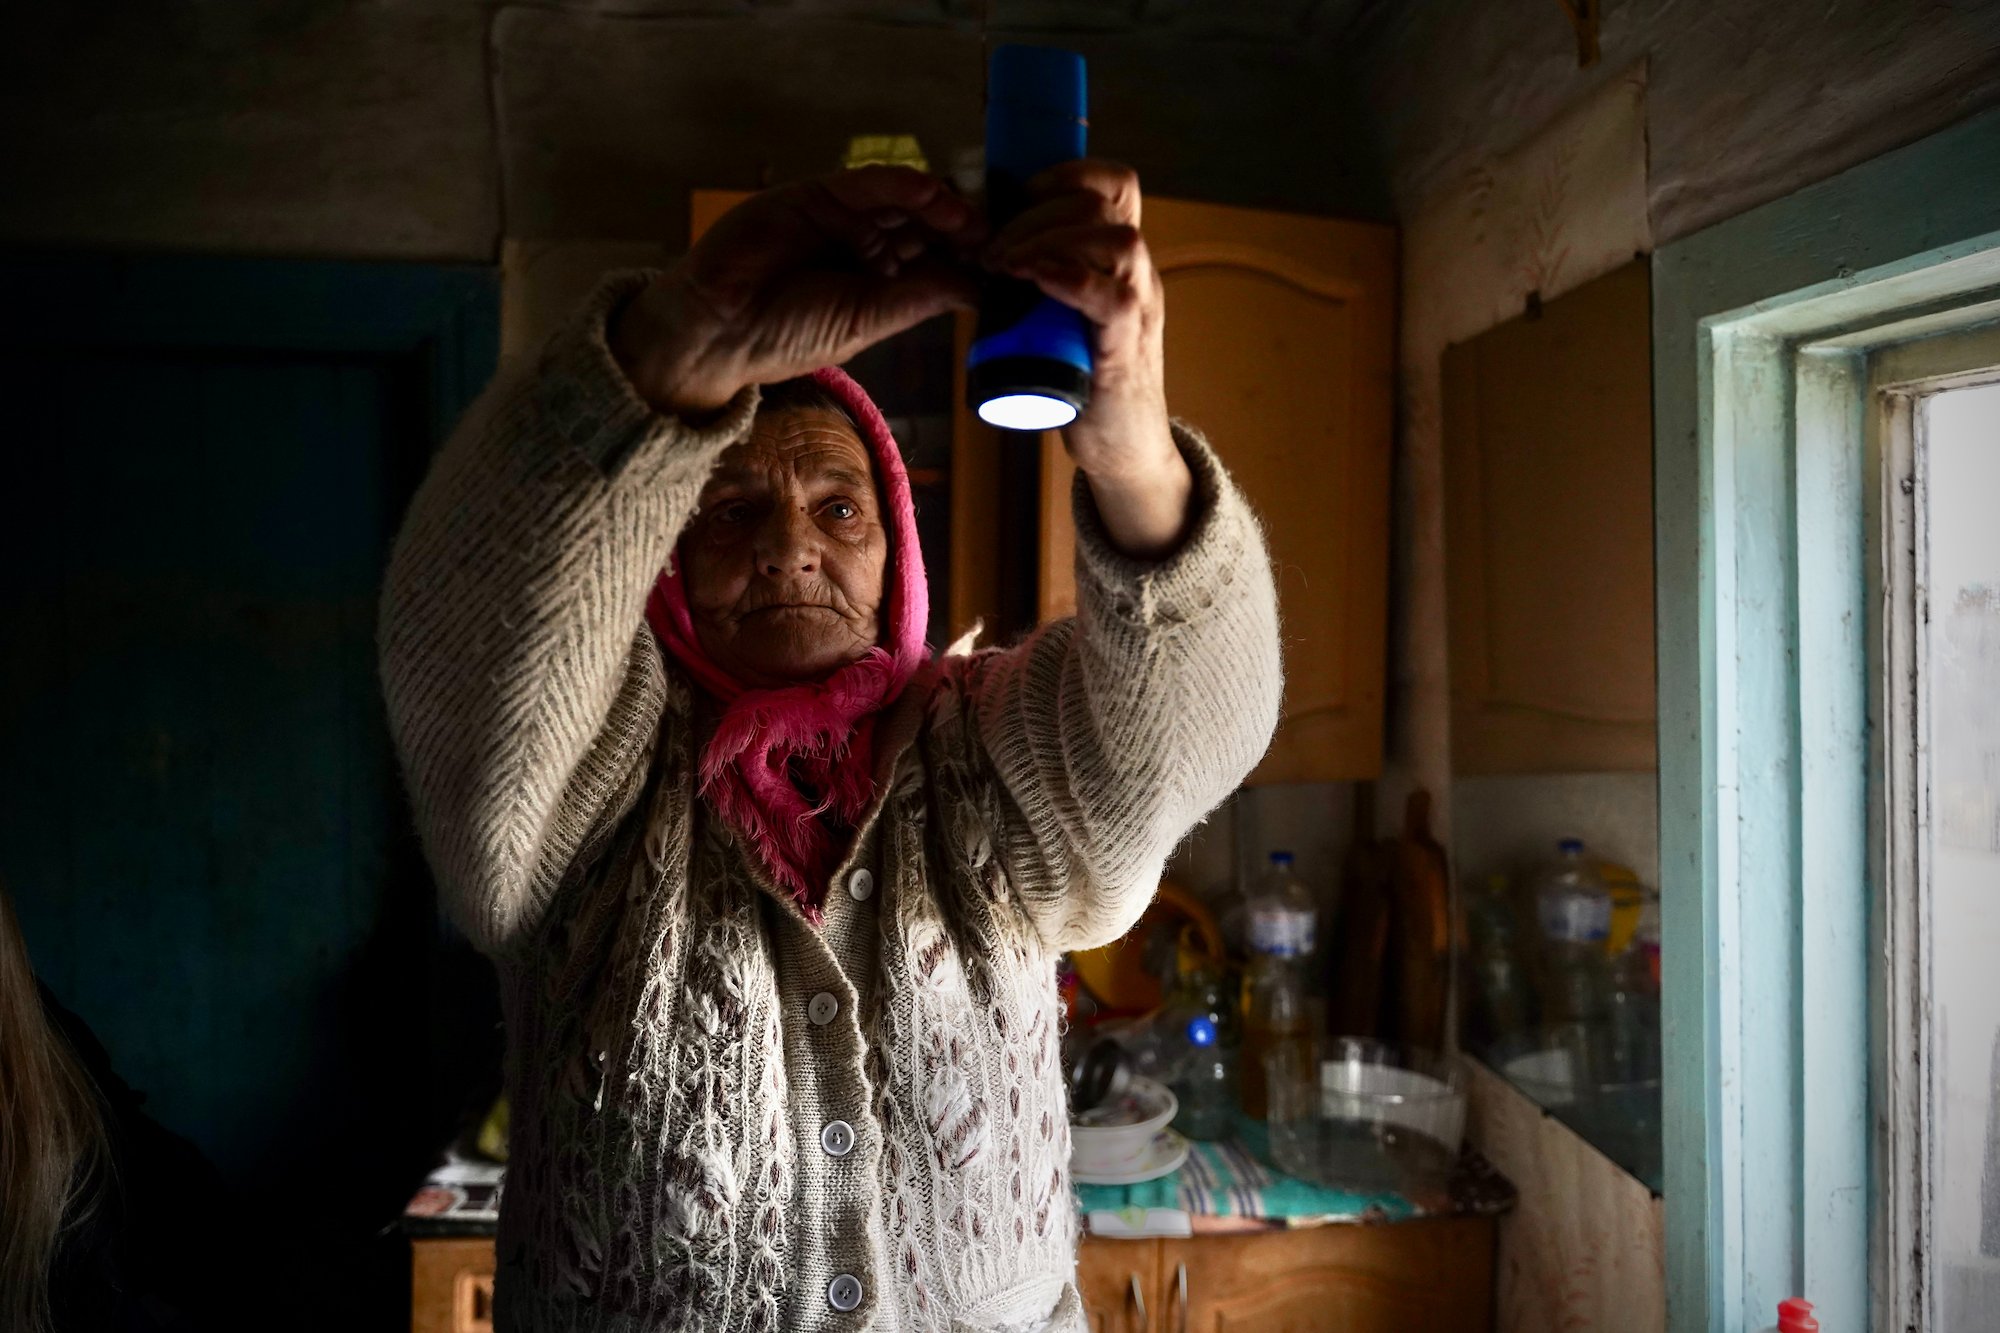 A Ukrainian woman hangs a lantern from the ceiling to use as a lamp in case of a power outage.